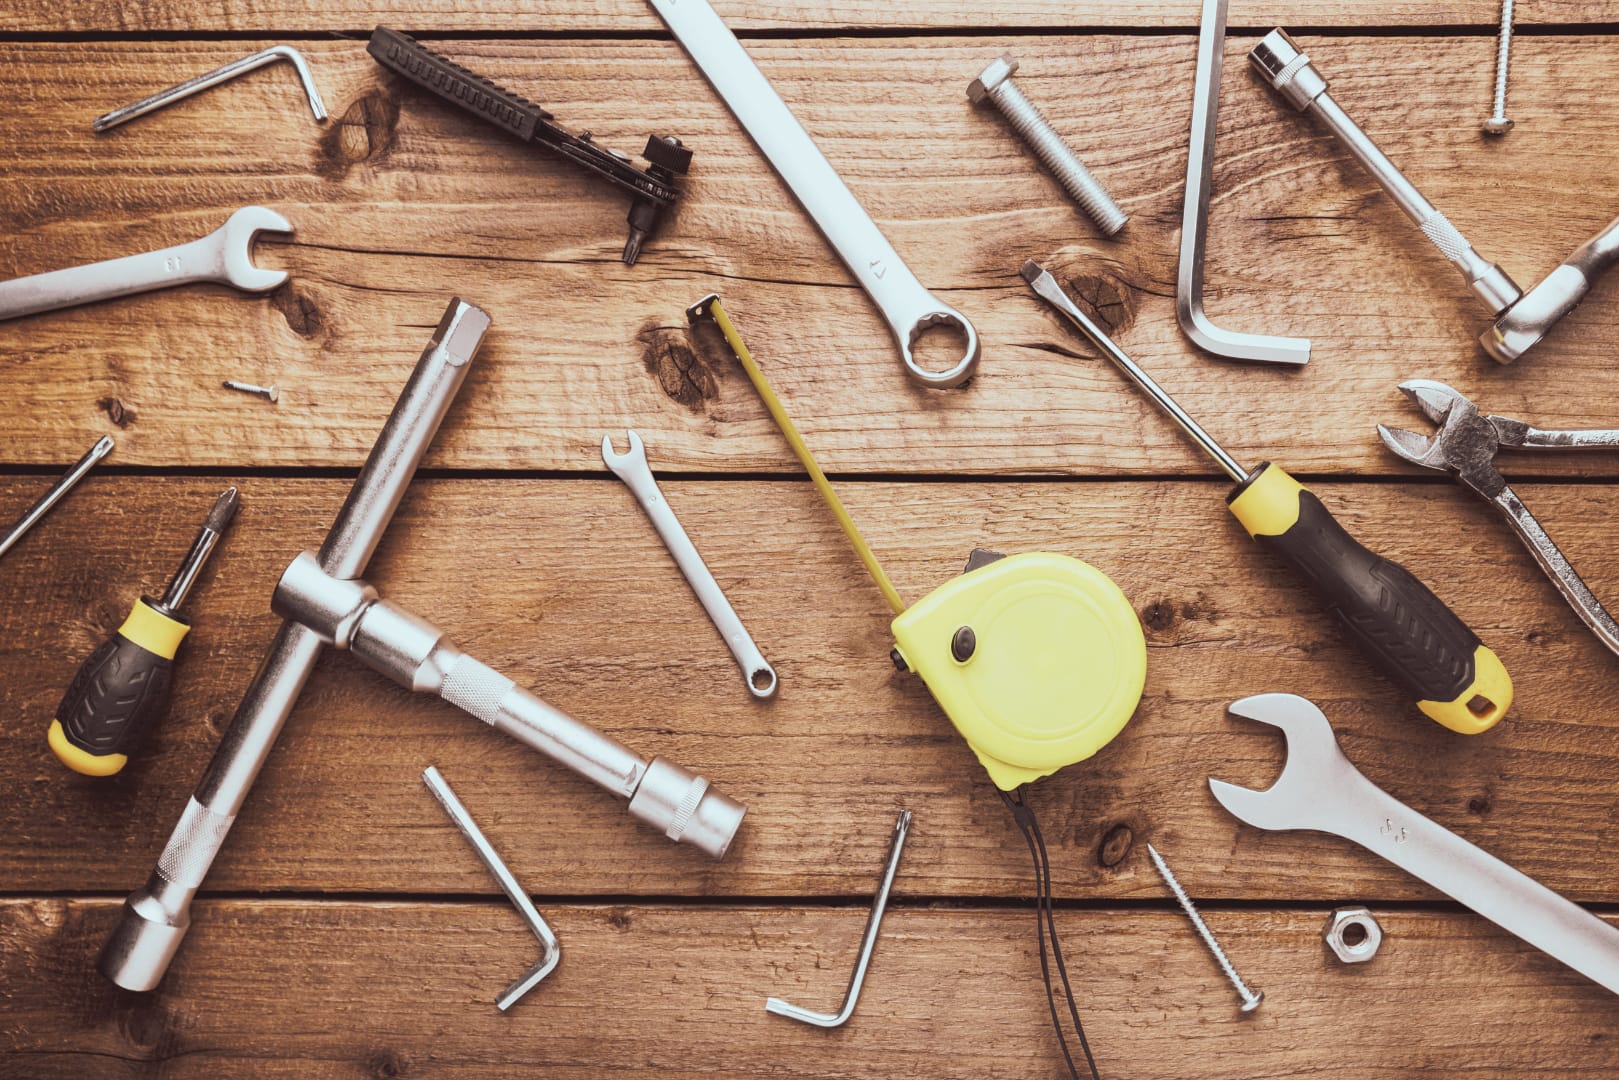 Essential tools for a DIY project.